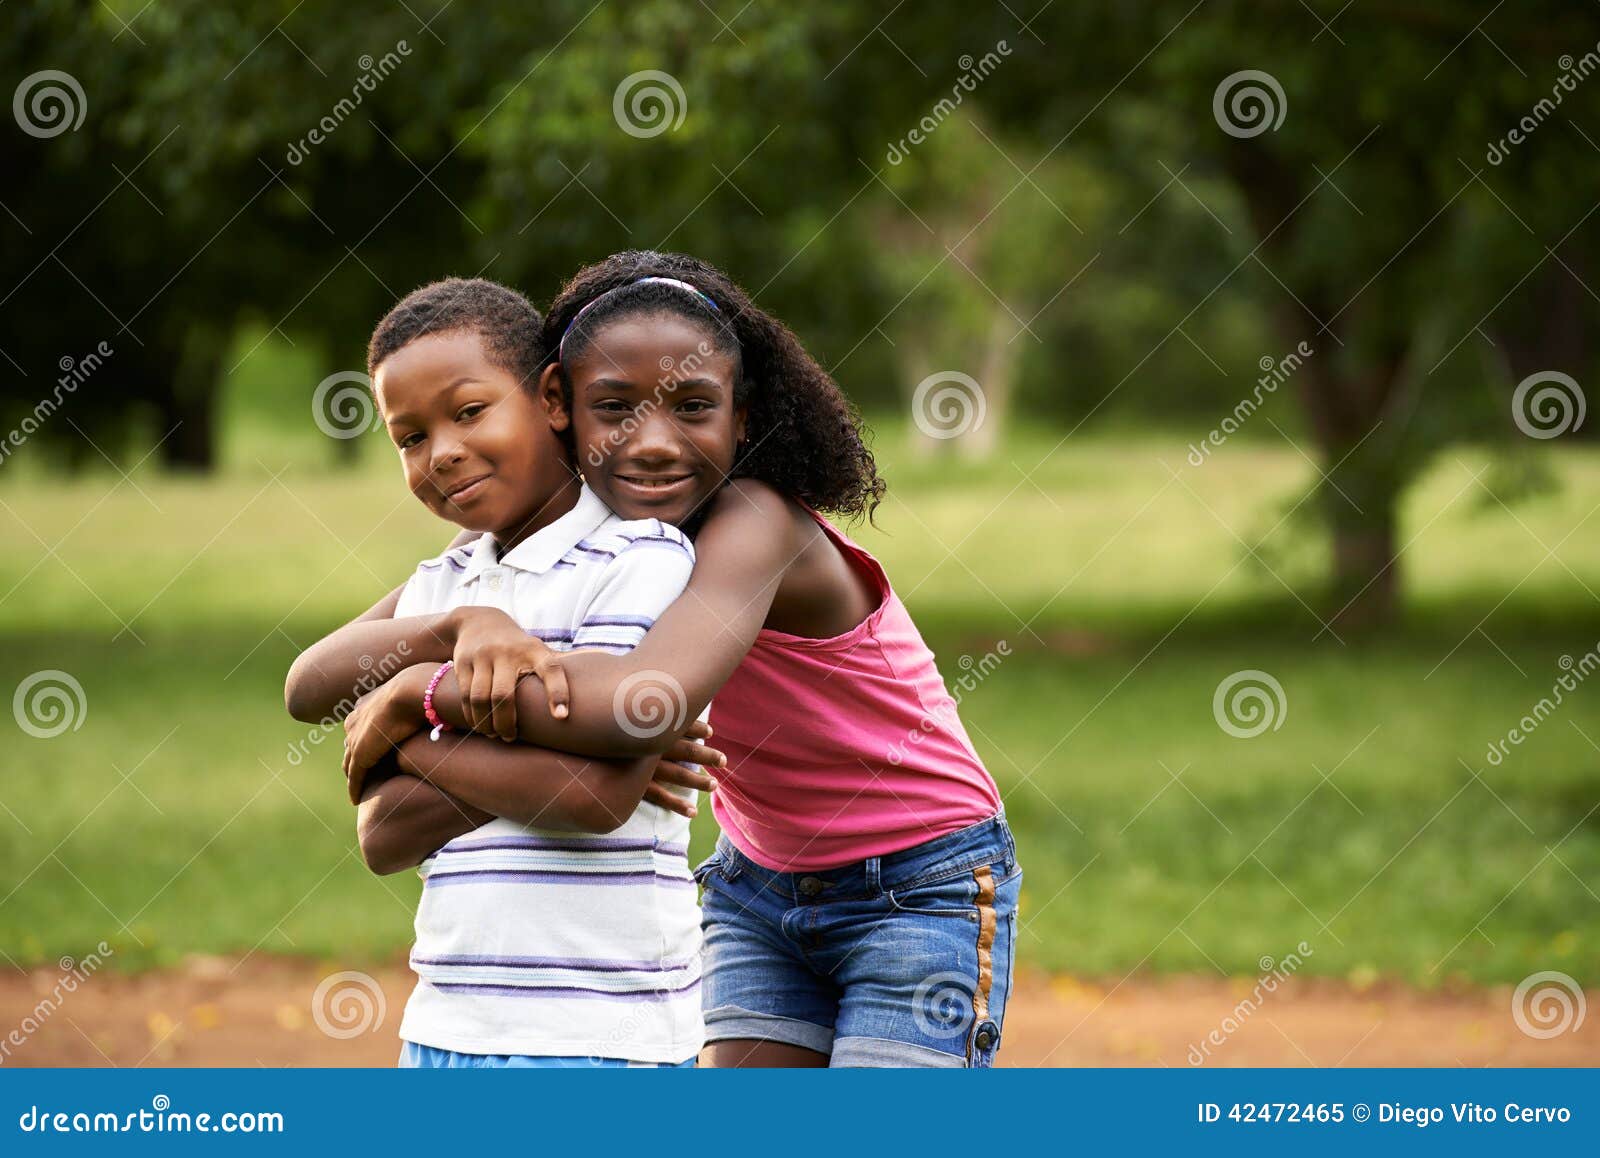 children african boy and girl in love hugging